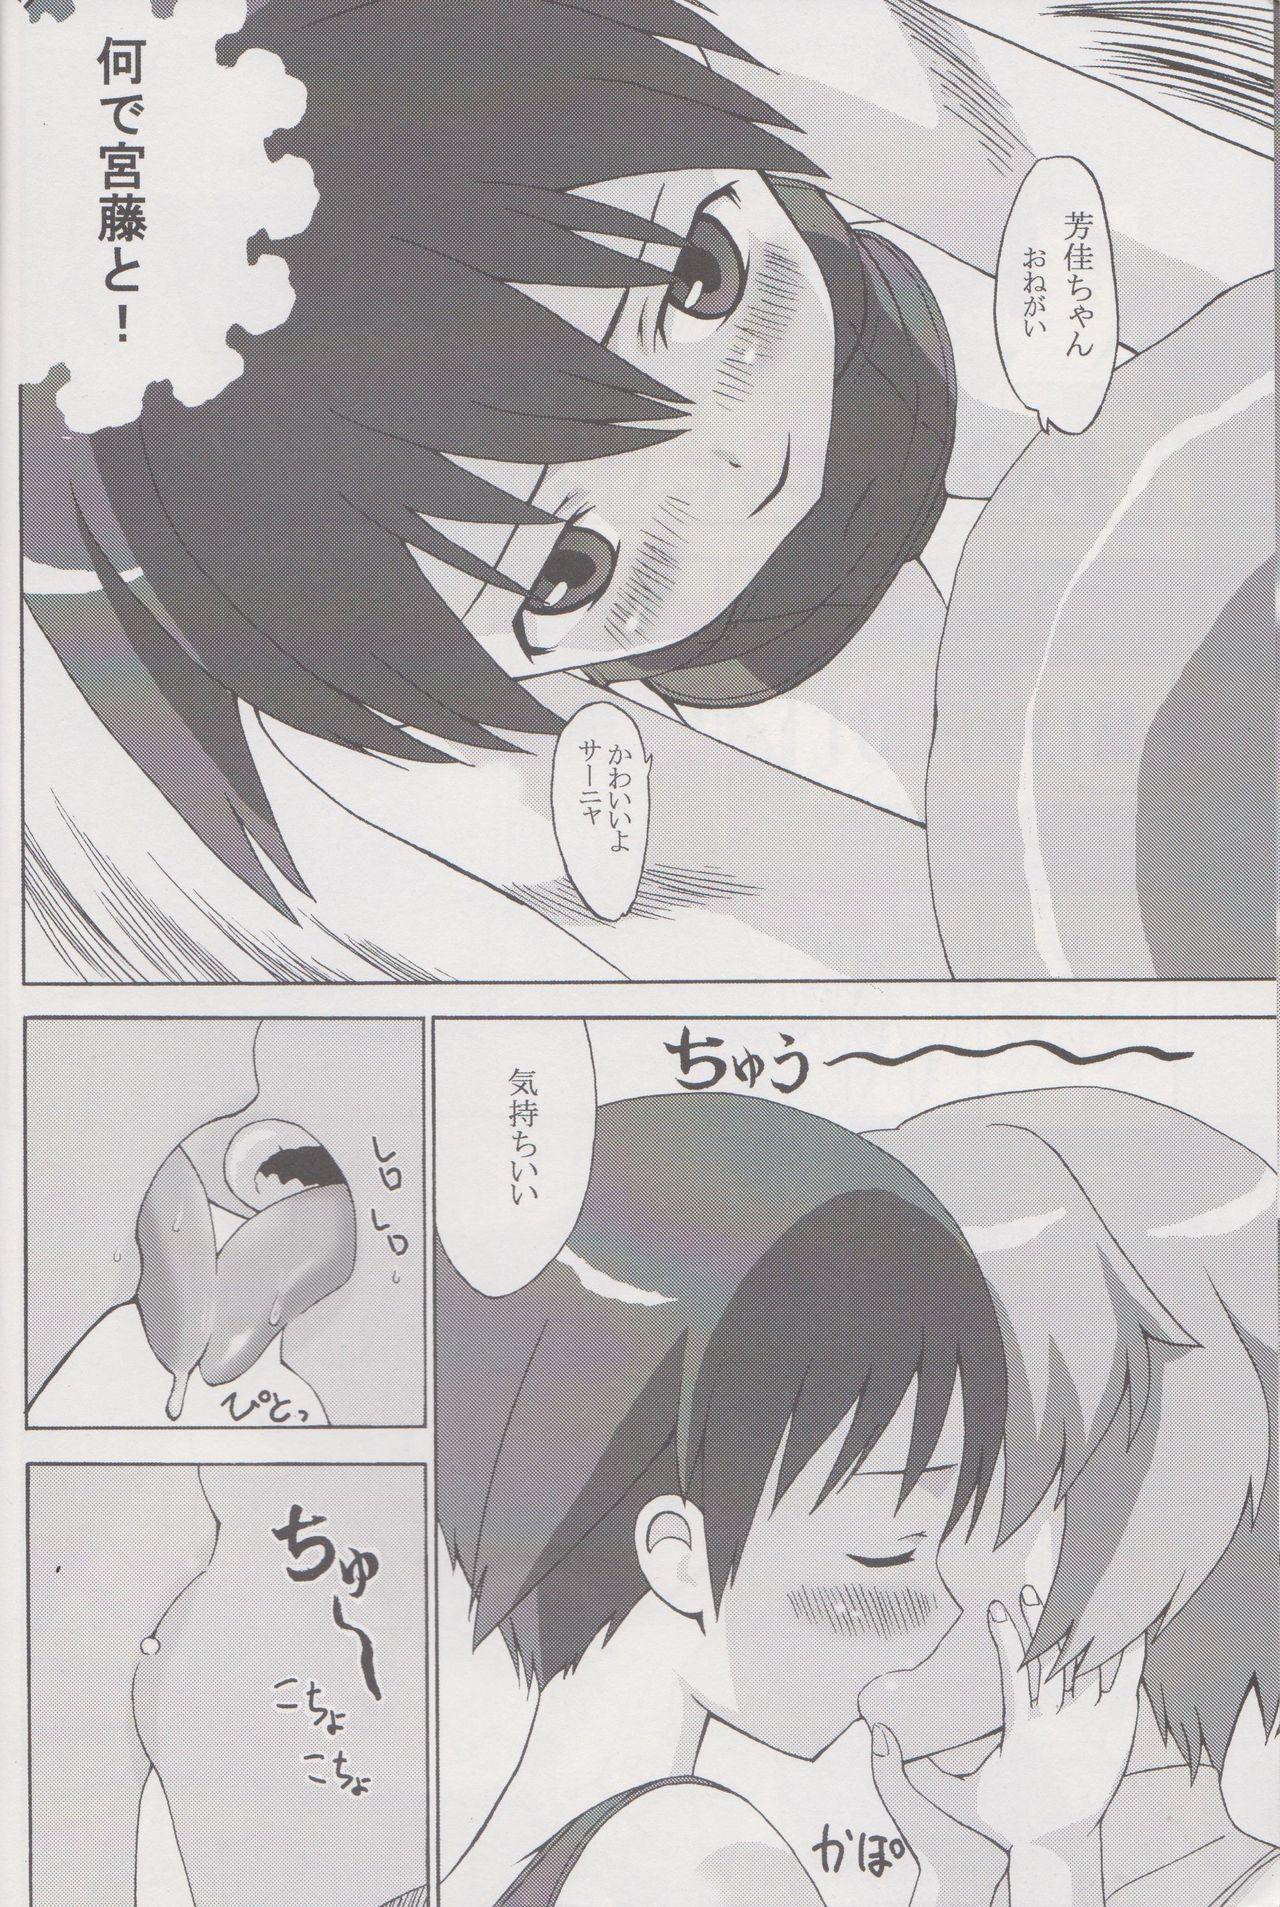 Chacal EILA ISM - Strike witches Fucking - Page 5